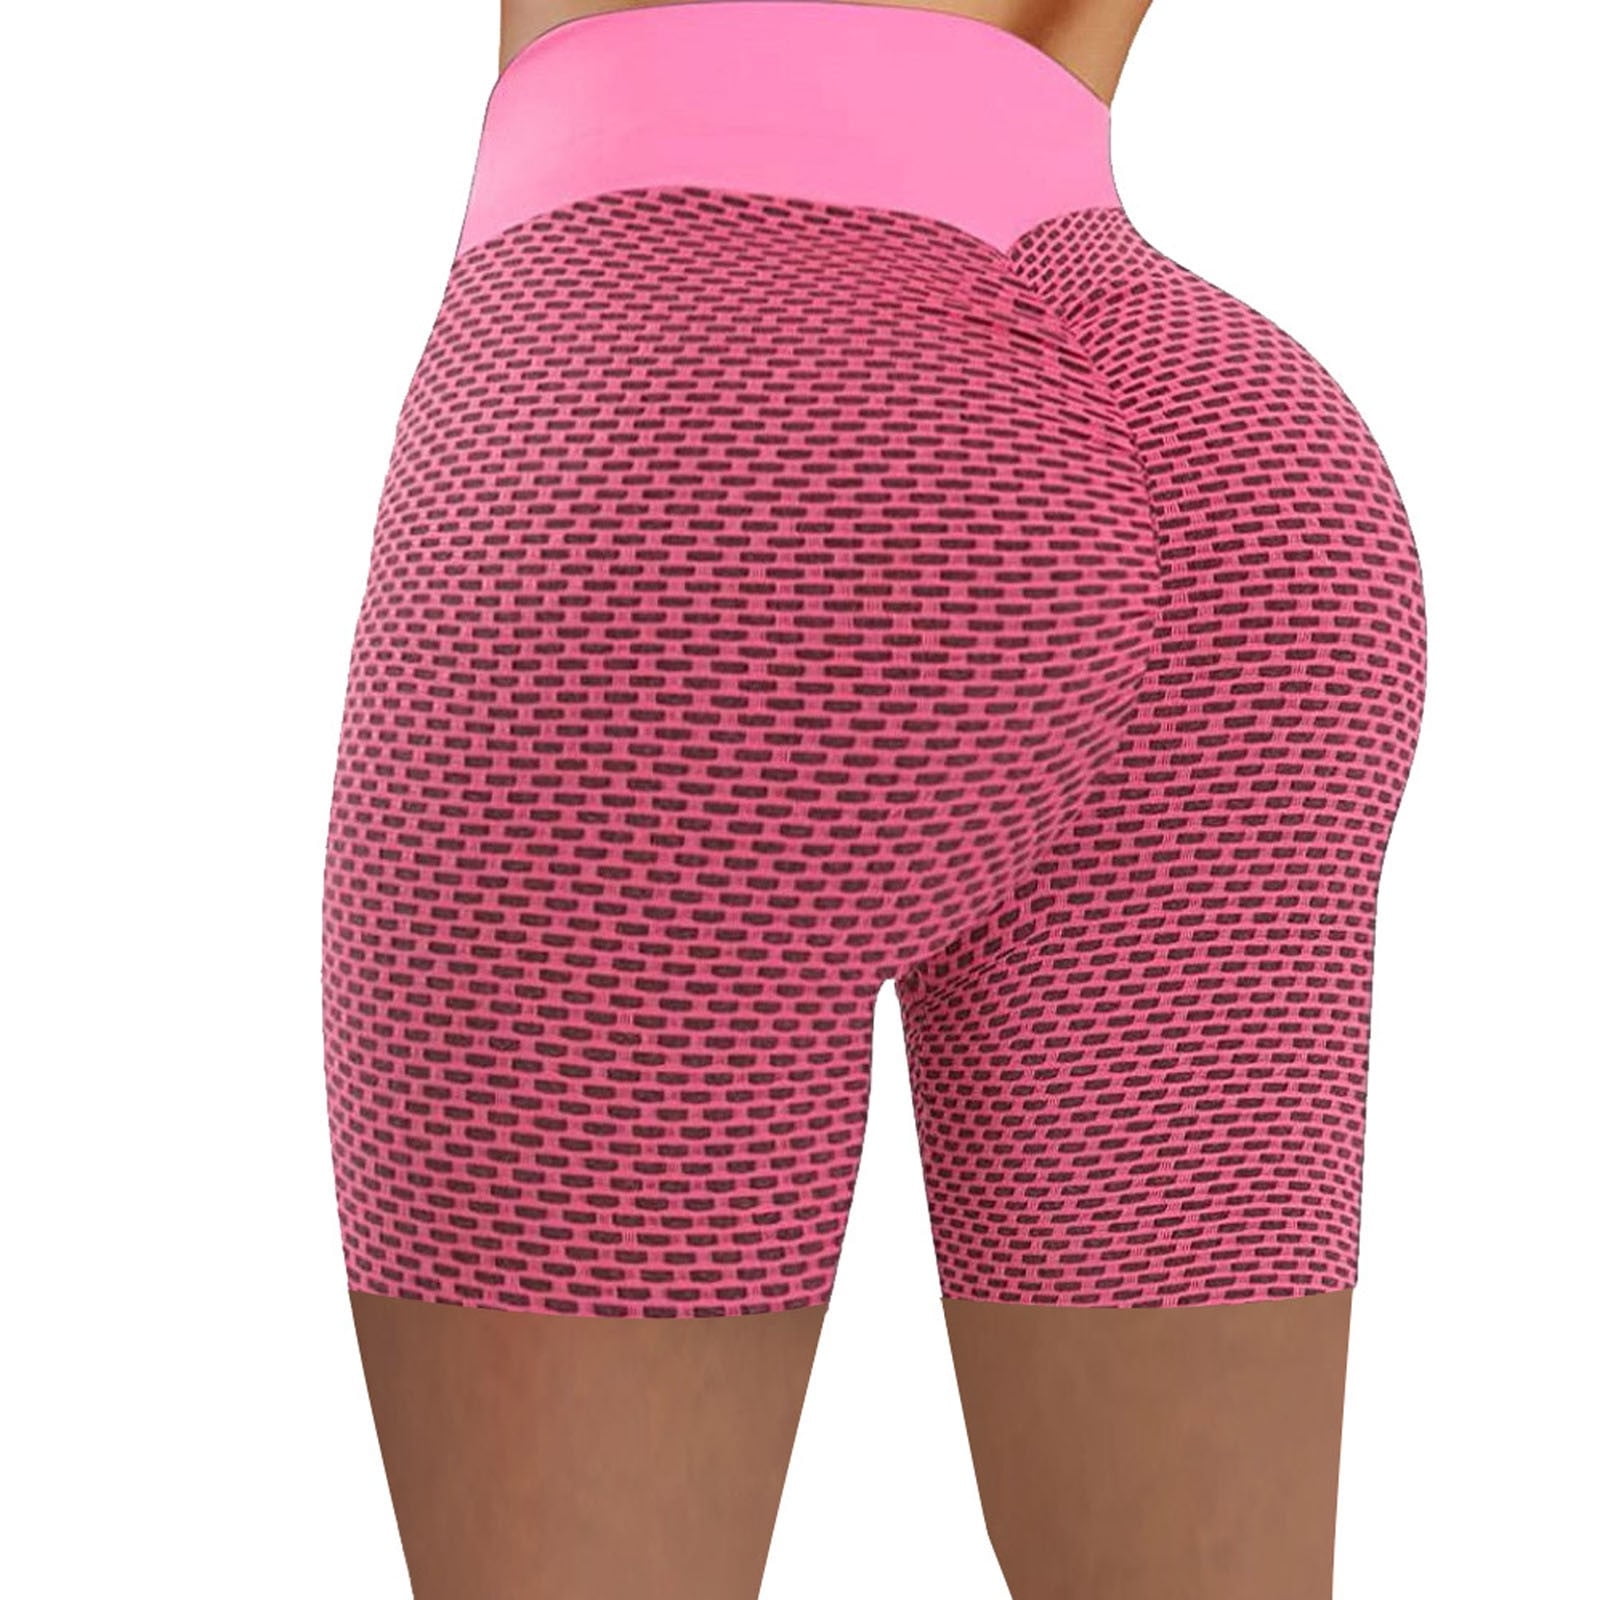 Generic Scrunch Cycling Shorts Ribbed Seamless Fitness Outfit Push Up Butt  Lift Yoga Leggings Gym Wear Booty High Waist Summer Biker @ Best Price  Online